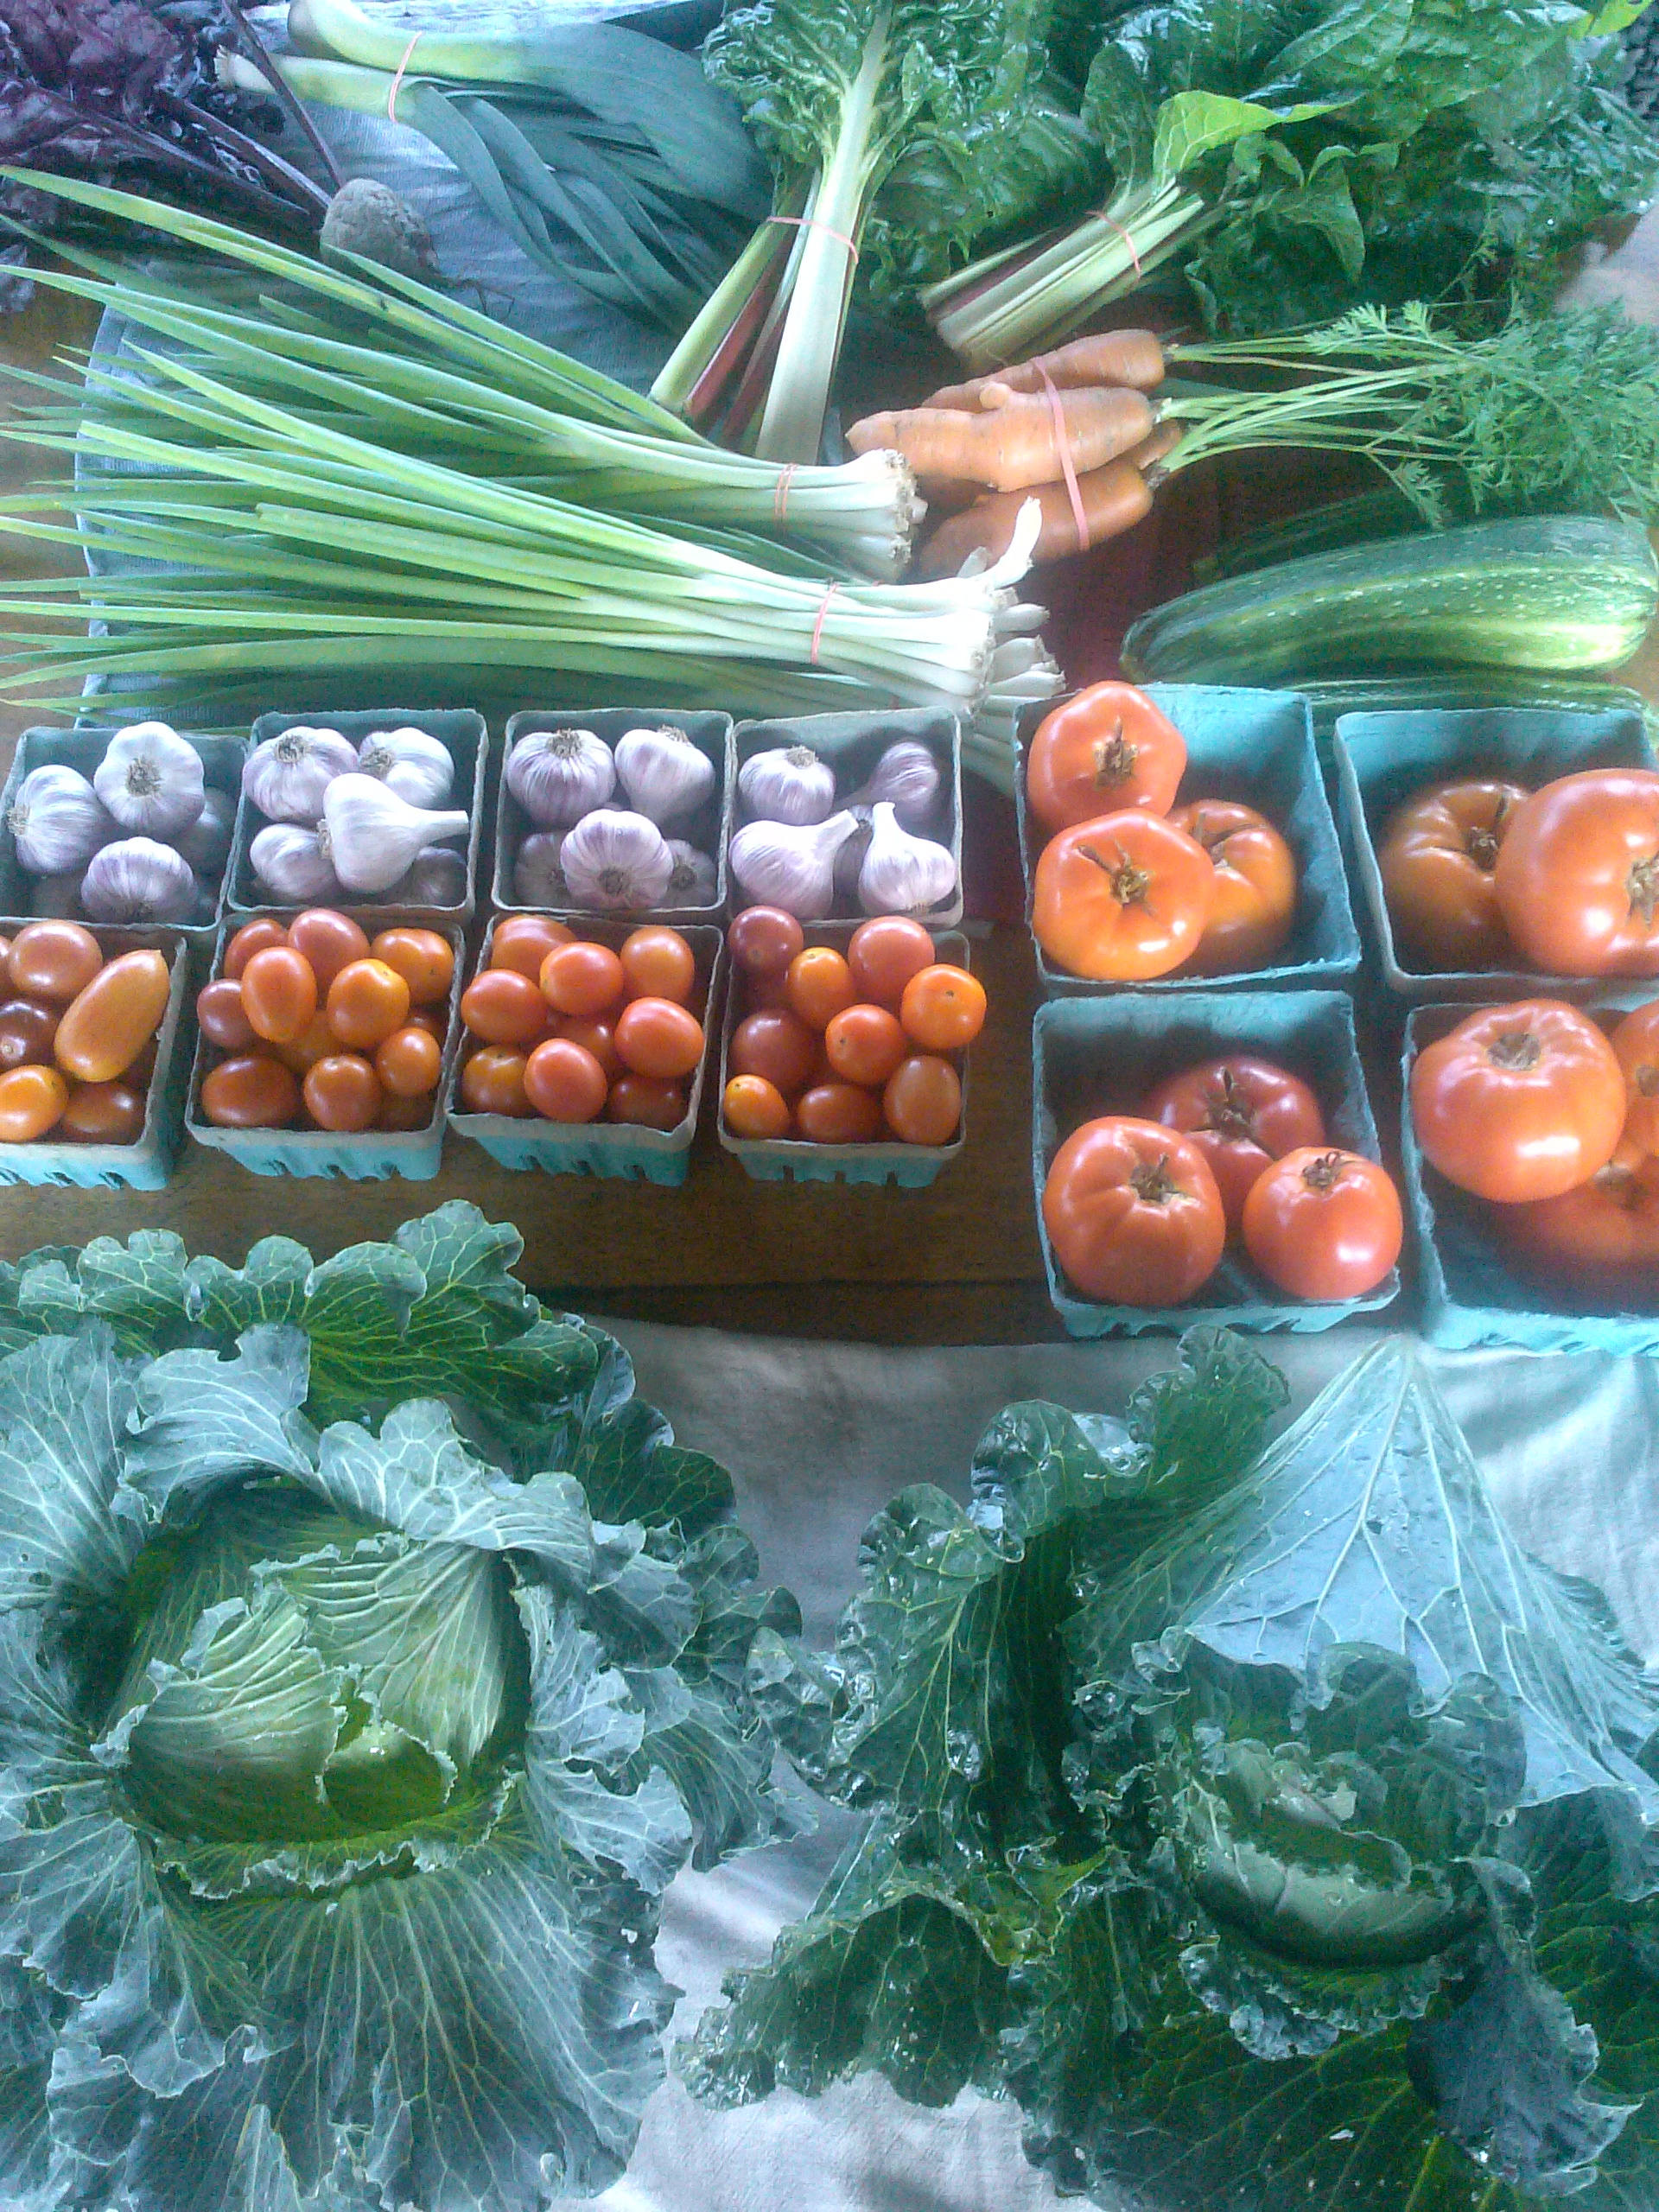 Assorted bunches and pints of veggies on the table ready for pick-up